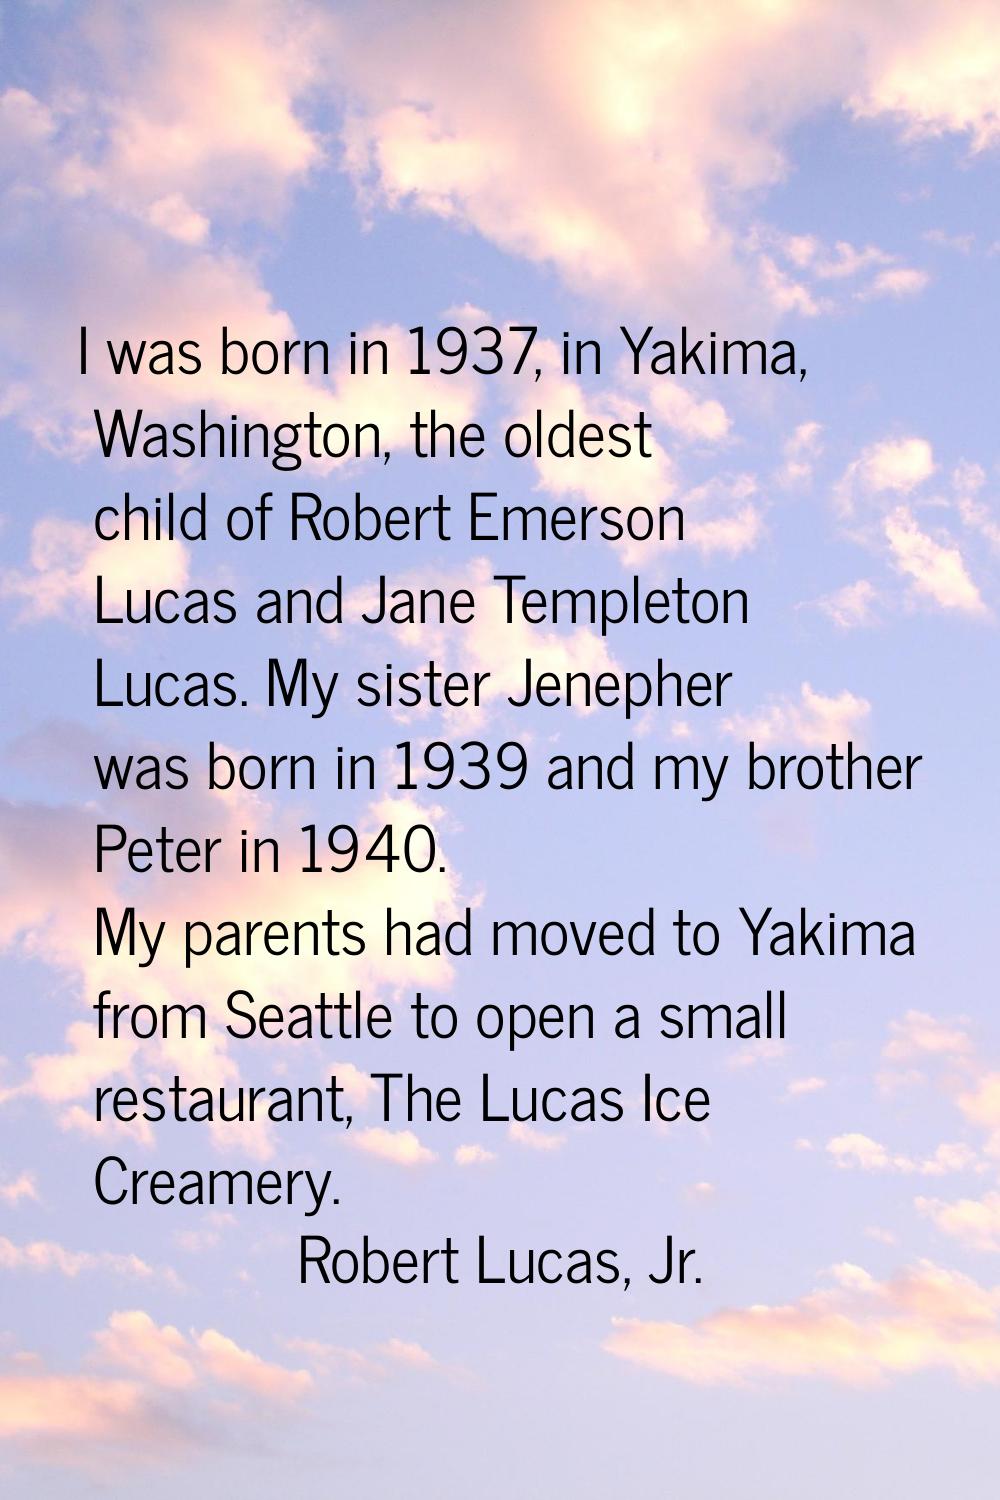 I was born in 1937, in Yakima, Washington, the oldest child of Robert Emerson Lucas and Jane Temple